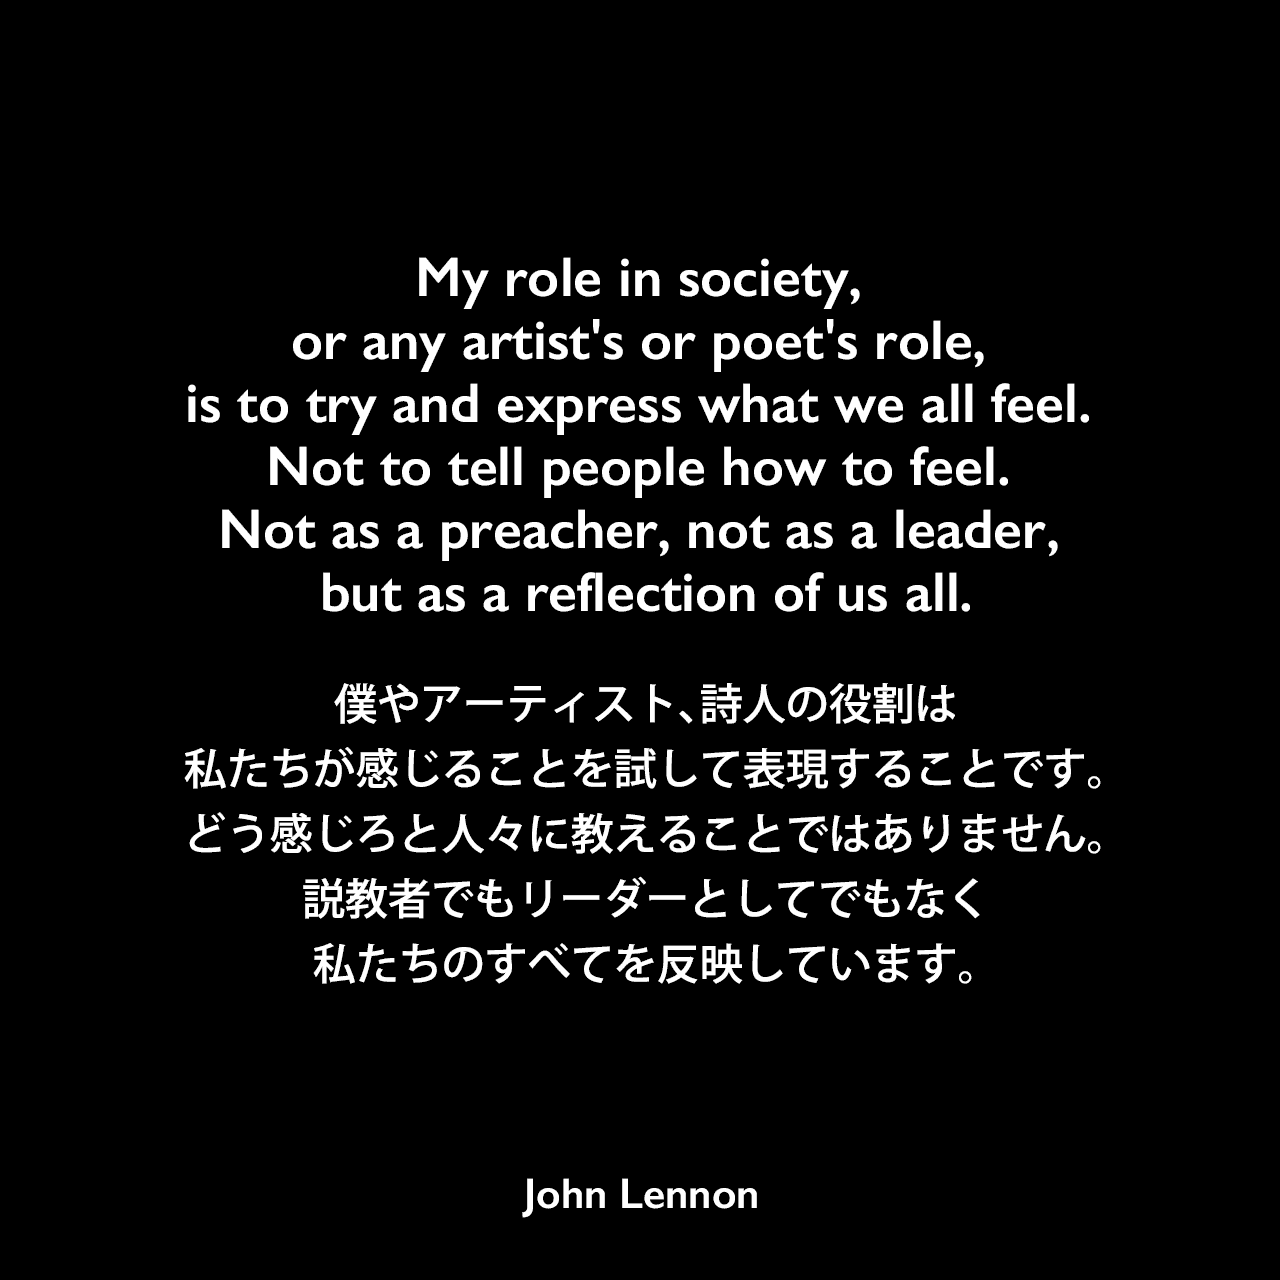 My role in society, or any artist's or poet's role, is to try and express what we all feel. Not to tell people how to feel. Not as a preacher, not as a leader, but as a reflection of us all.僕やアーティスト、詩人の役割は、私たちが感じることを試して表現することです。どう感じろと人々に教えることではありません。説教者でもリーダーとしてでもなく、私たちのすべてを反映しています。- 1980年最後のラジオインタビューよりJohn Lennon